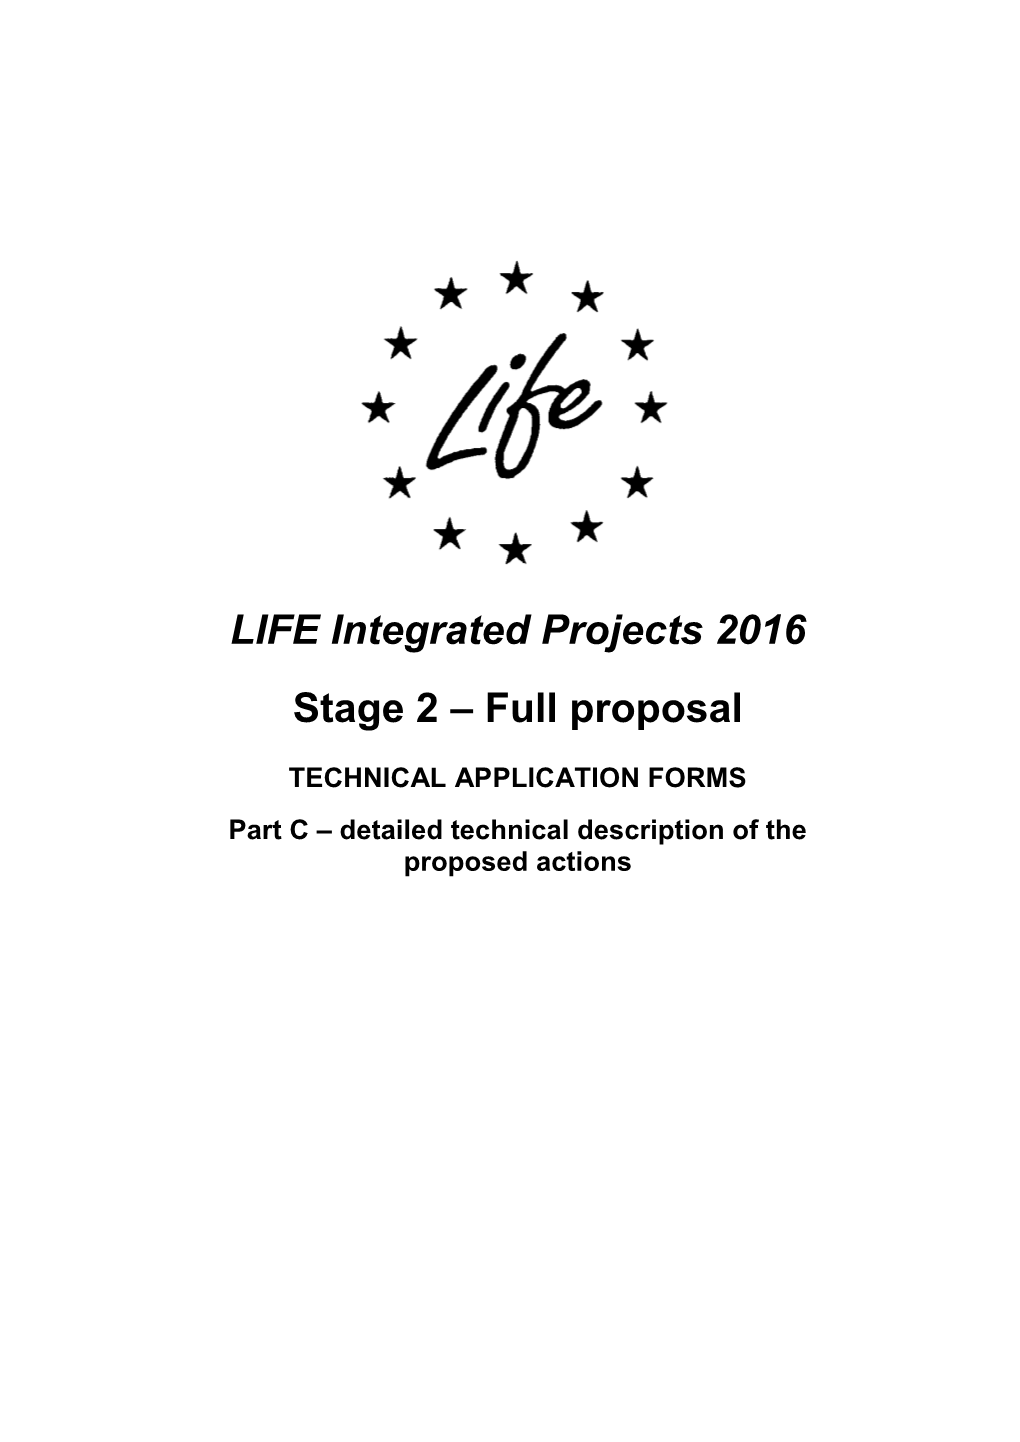 LIFE Integrated Projects 2016 Stage 2 – Full Proposal